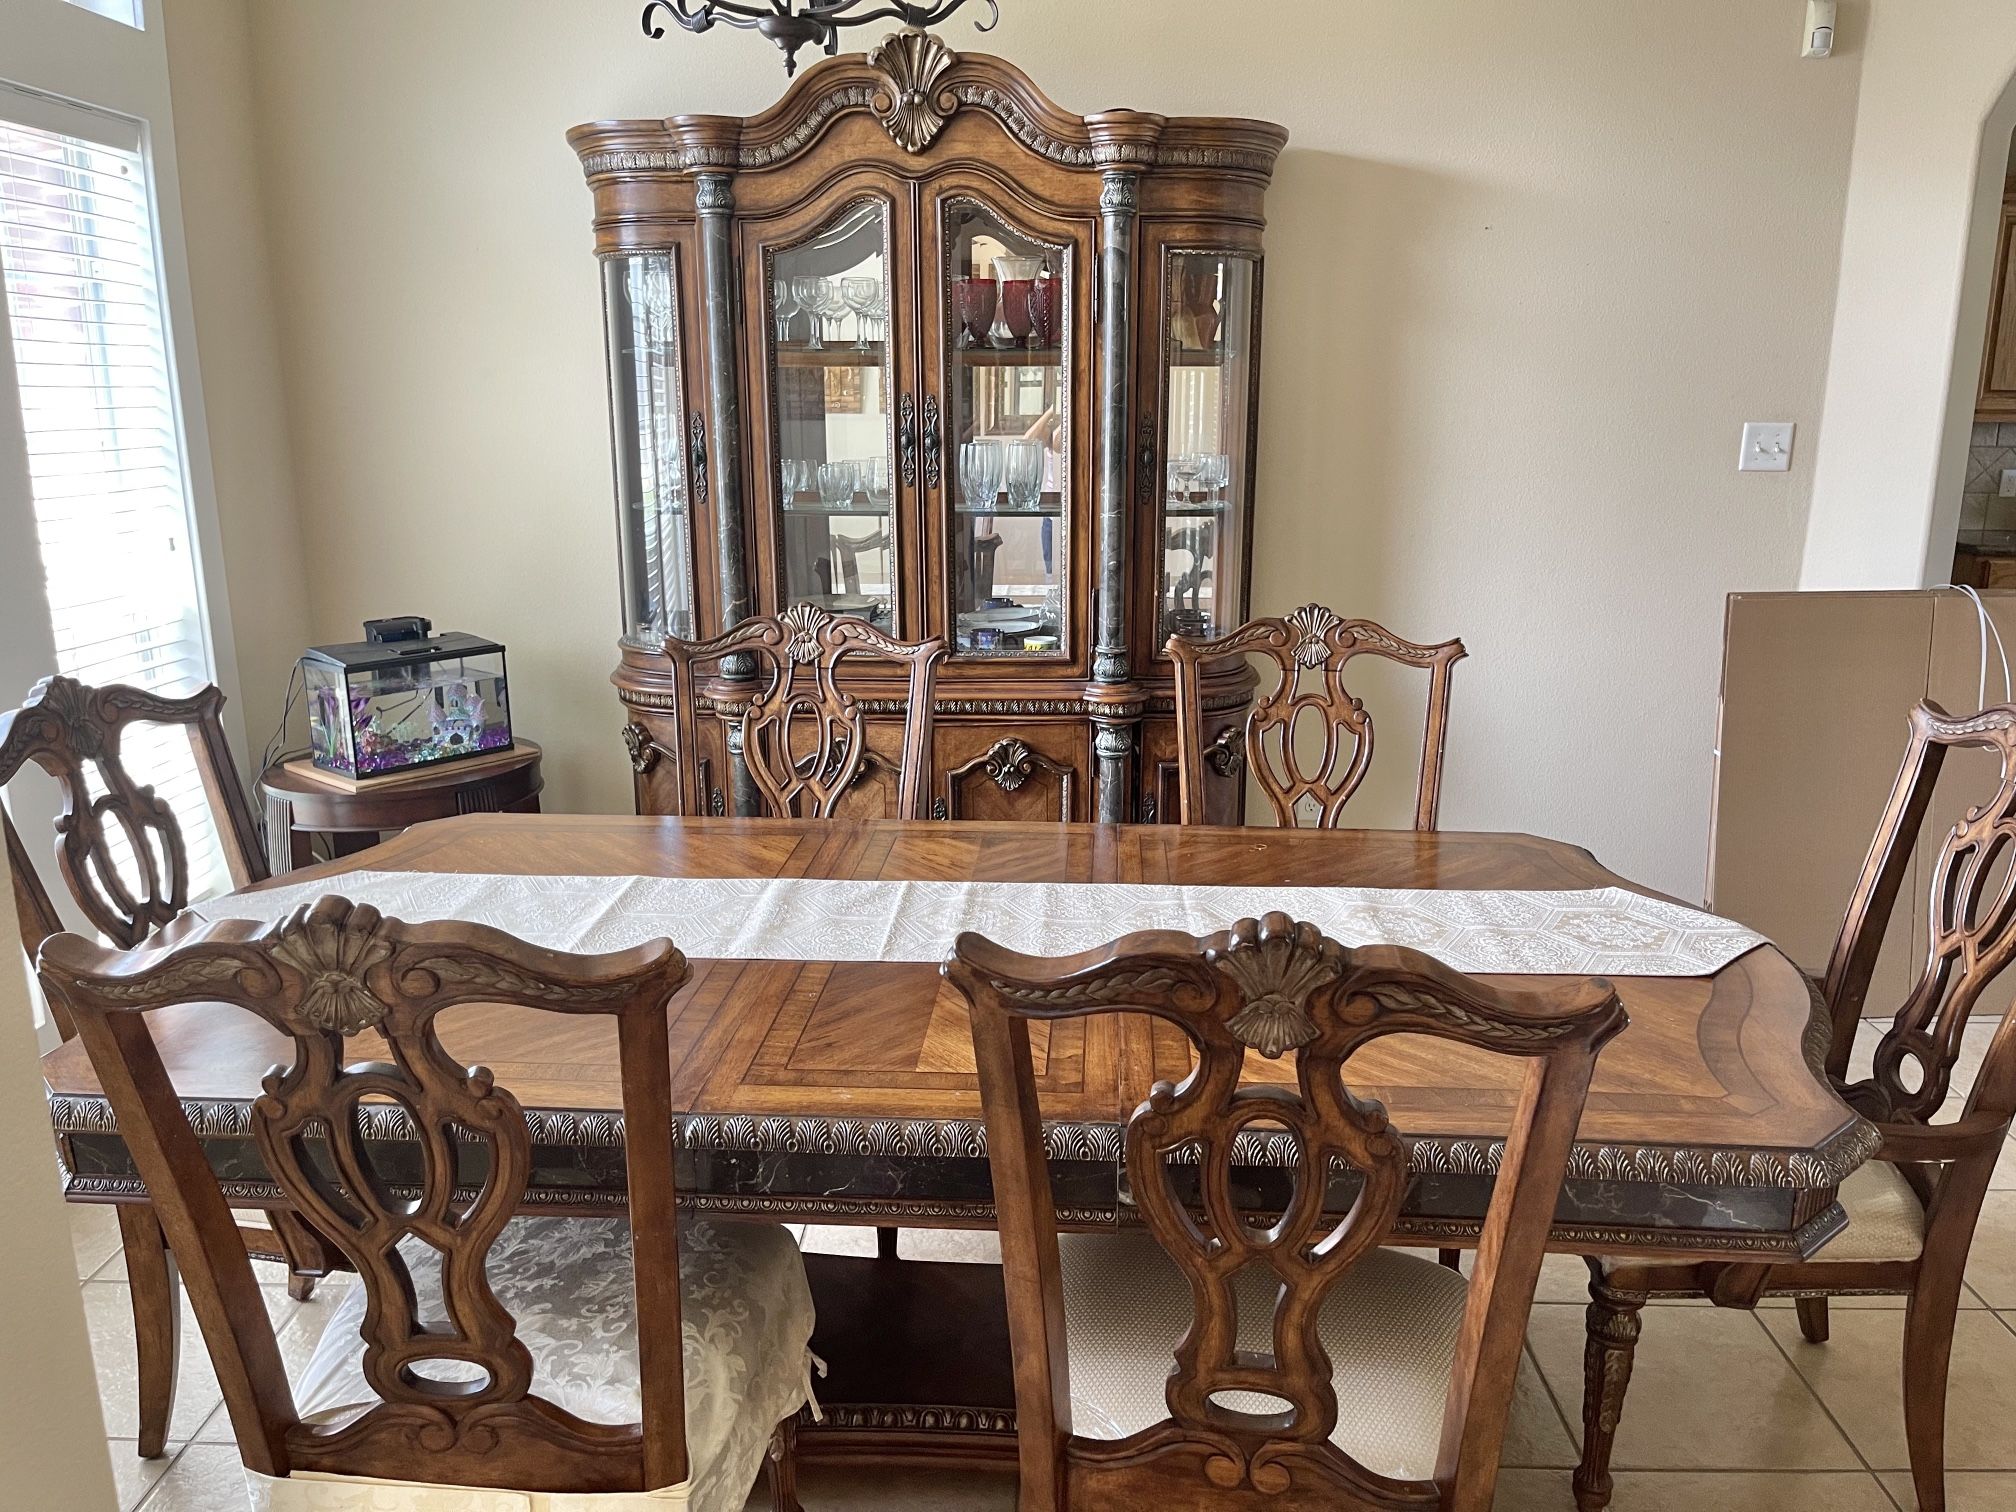 Formal Dining Room Table, Chairs, And China Cabinet 